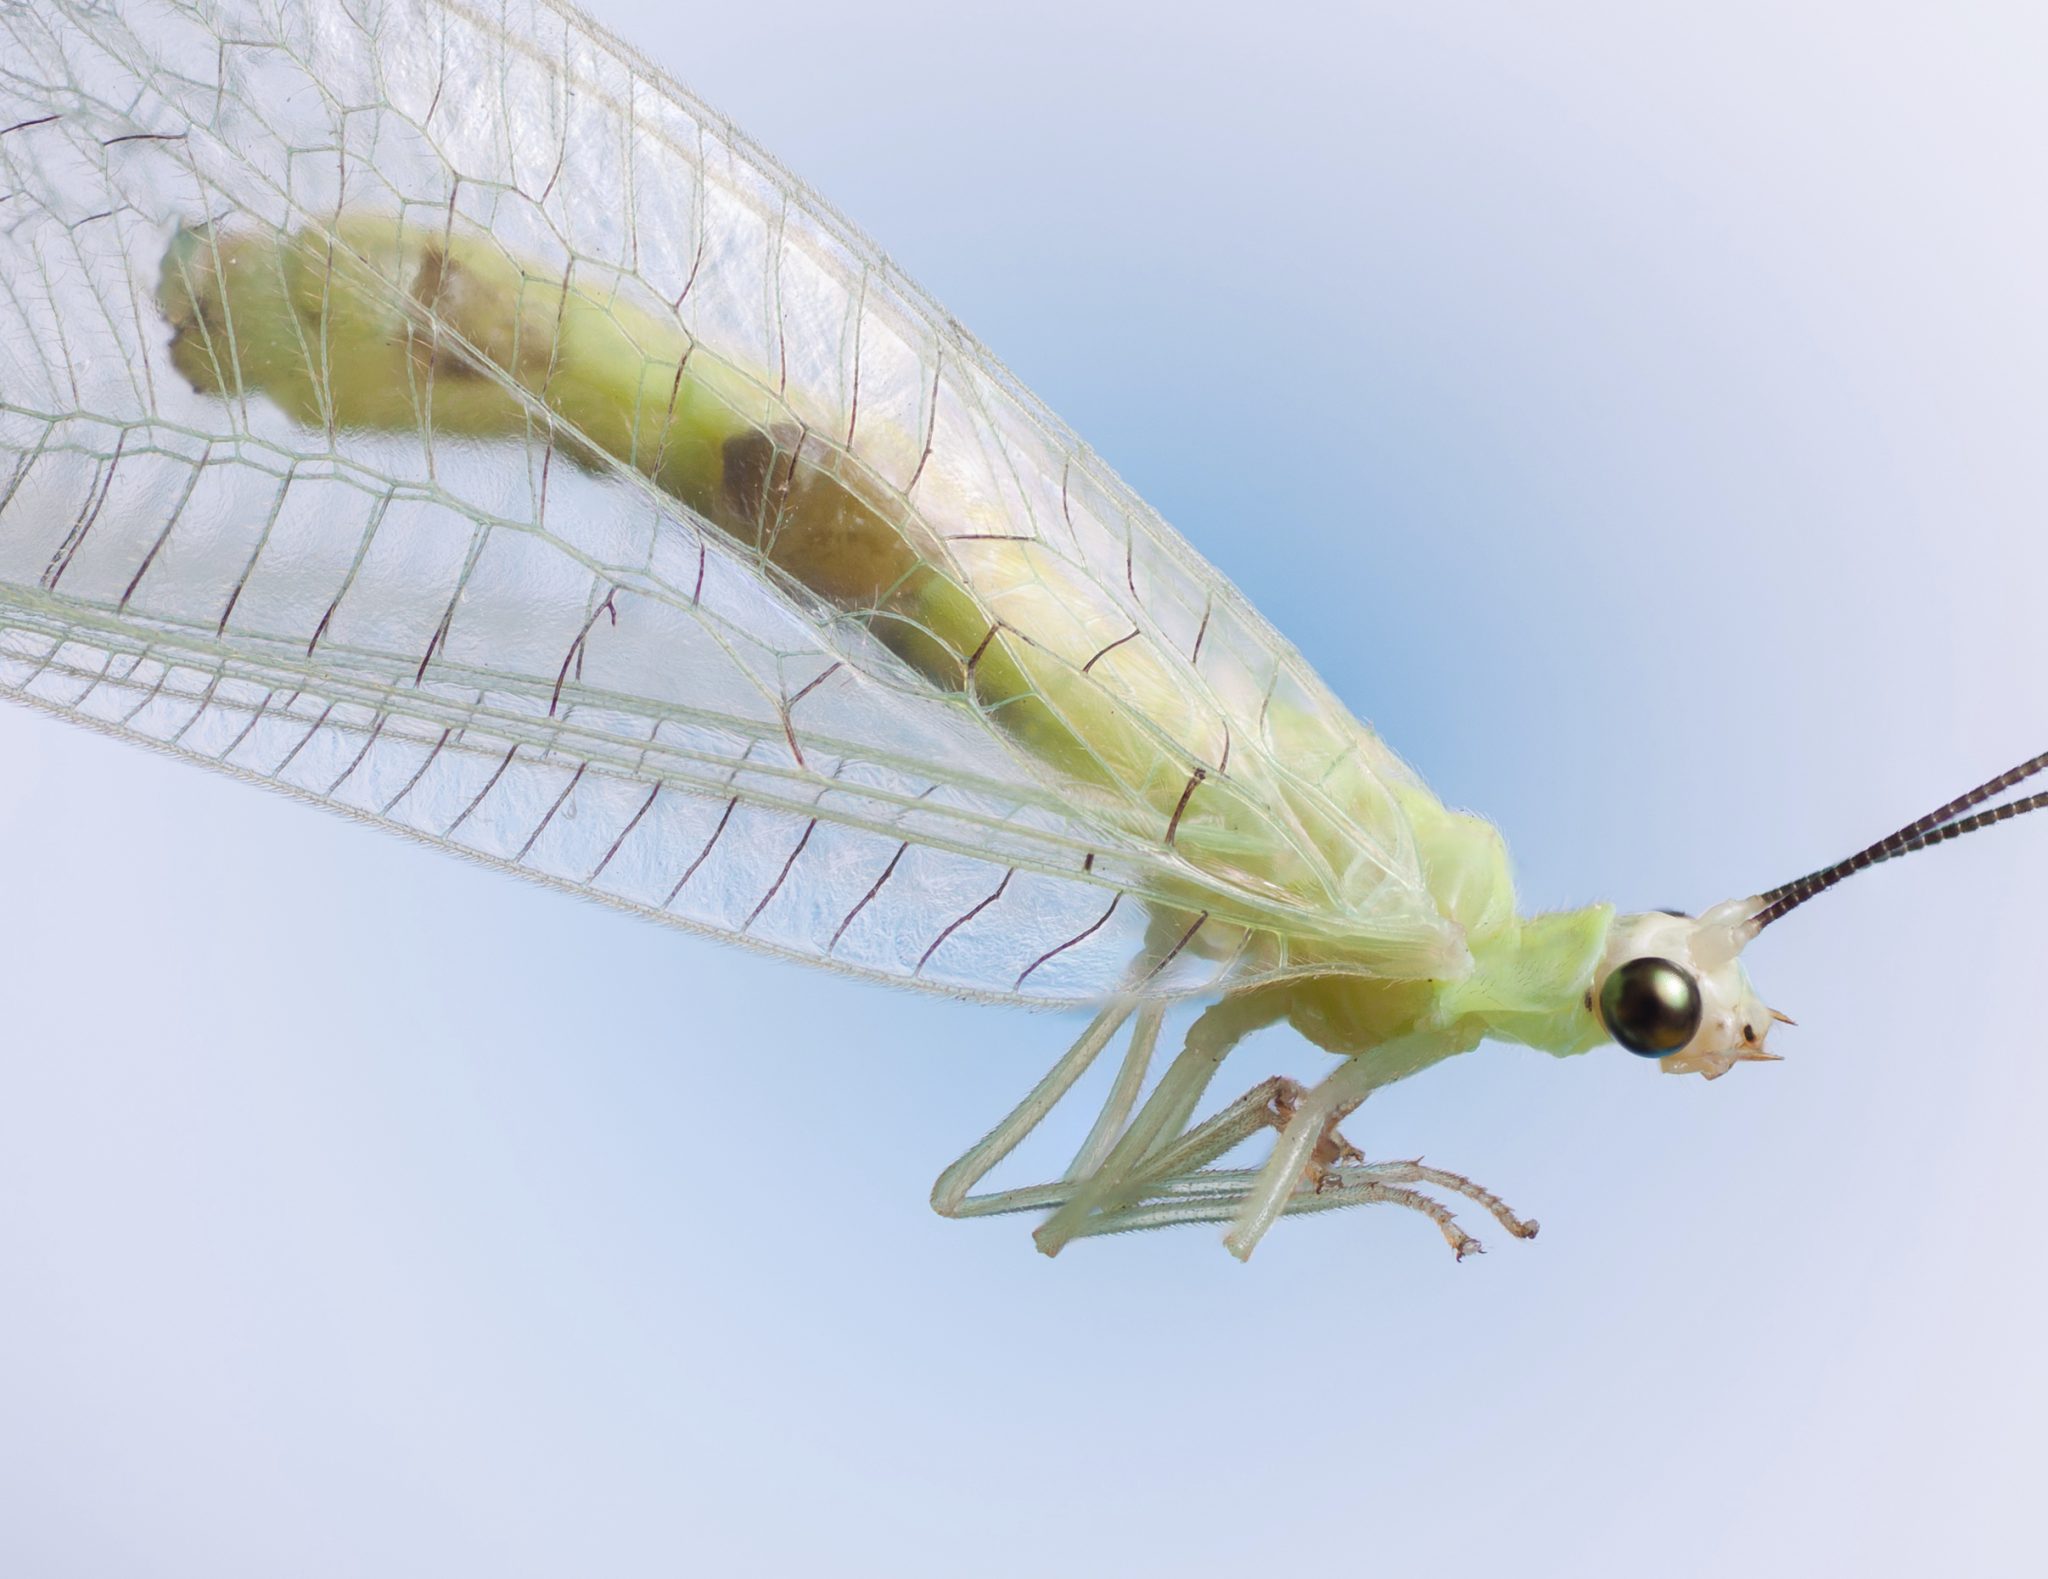 Top 10 Most Wanted Bugs in Your Garden – Green Lacewing - Alabama